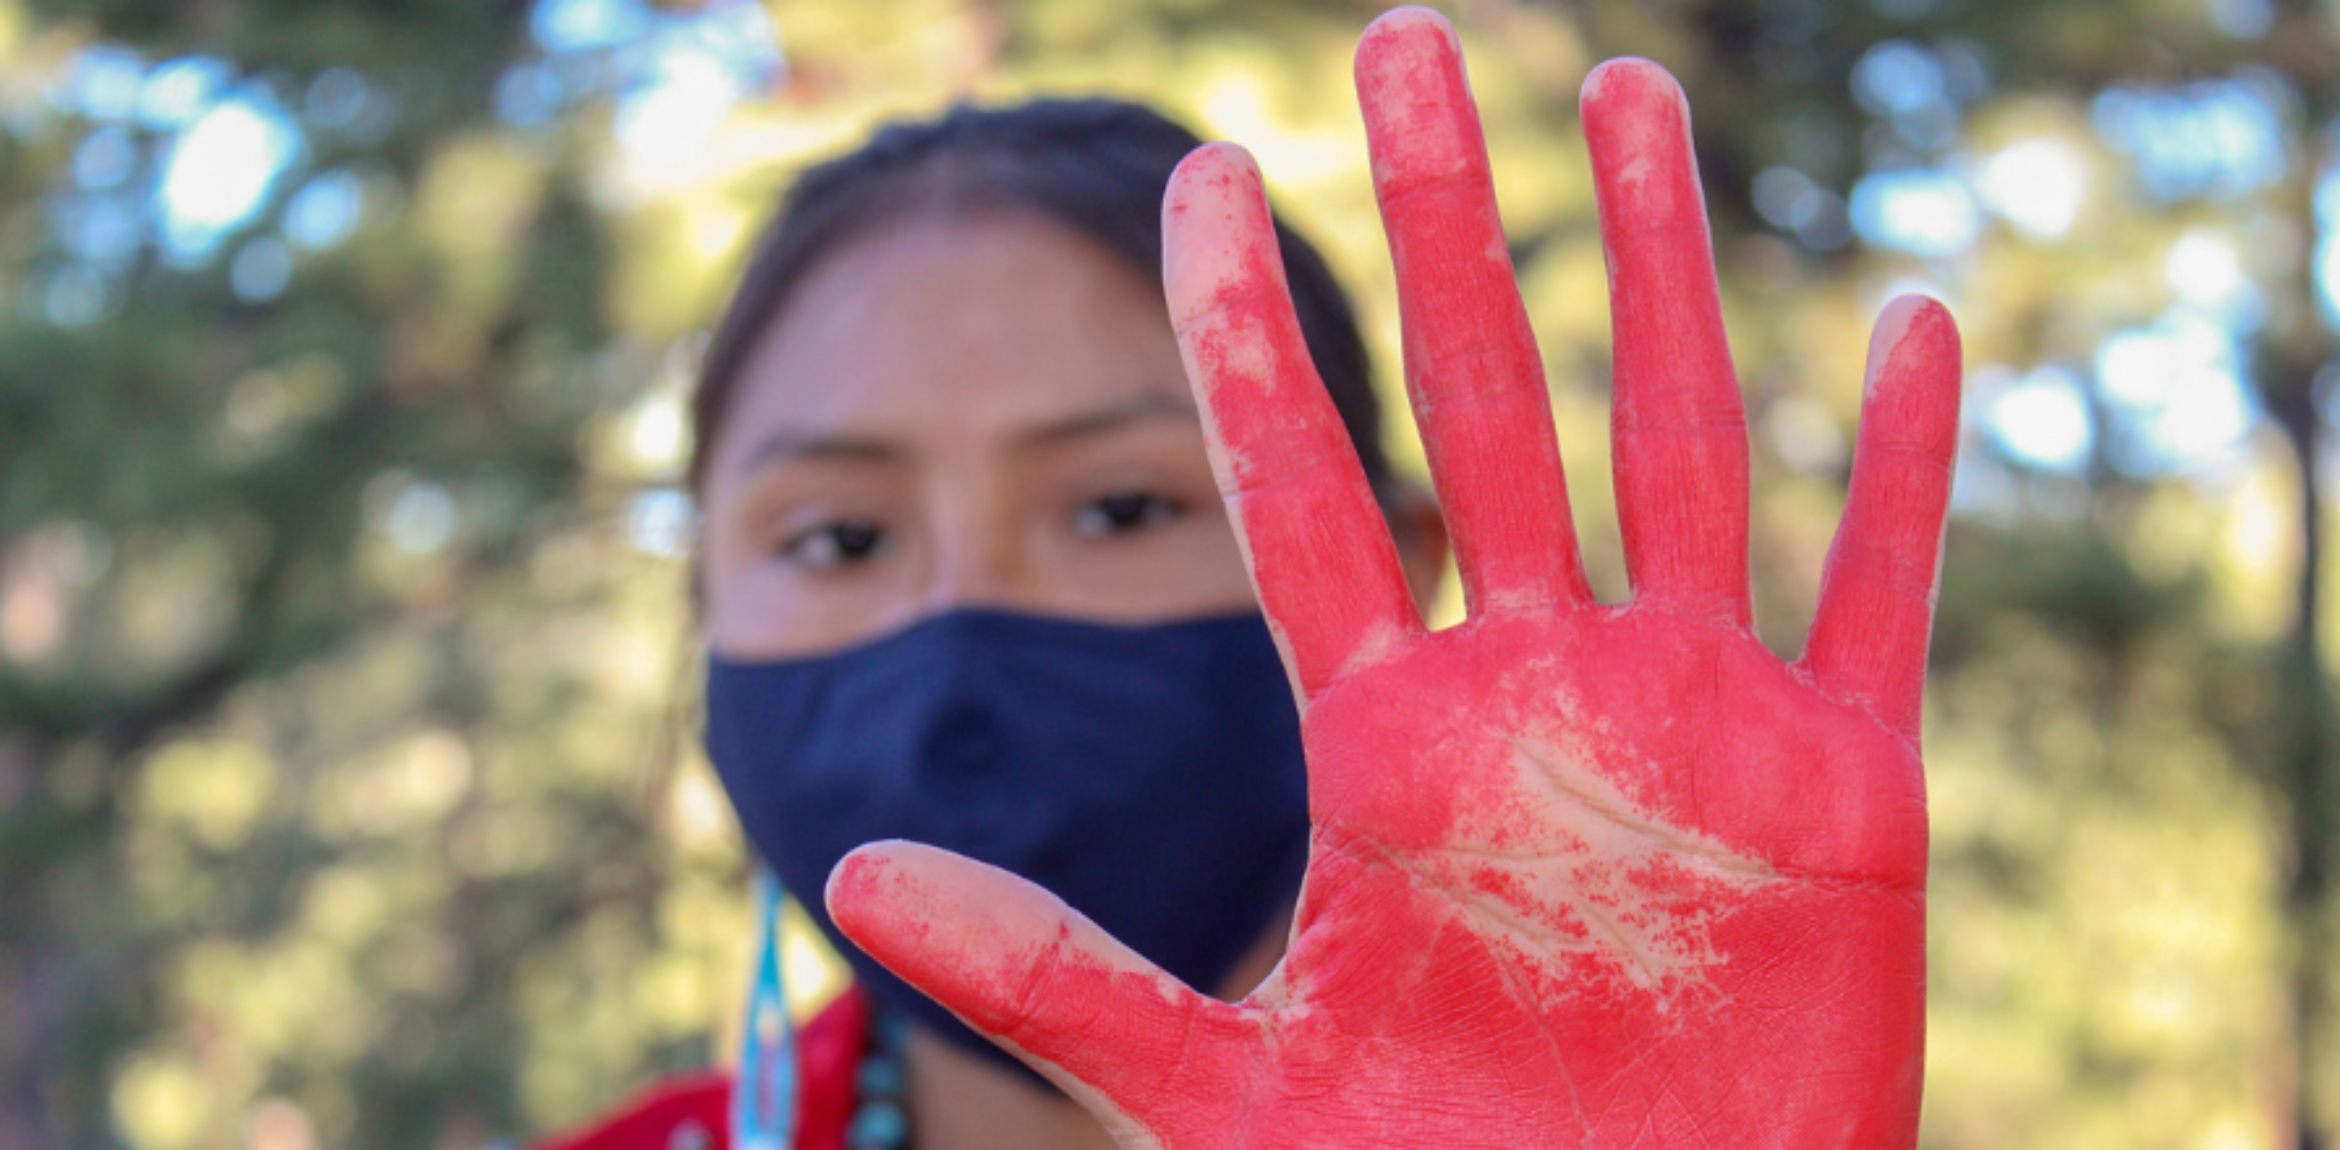 Indigenous woman with a black face mask holding hand up covered in red paint